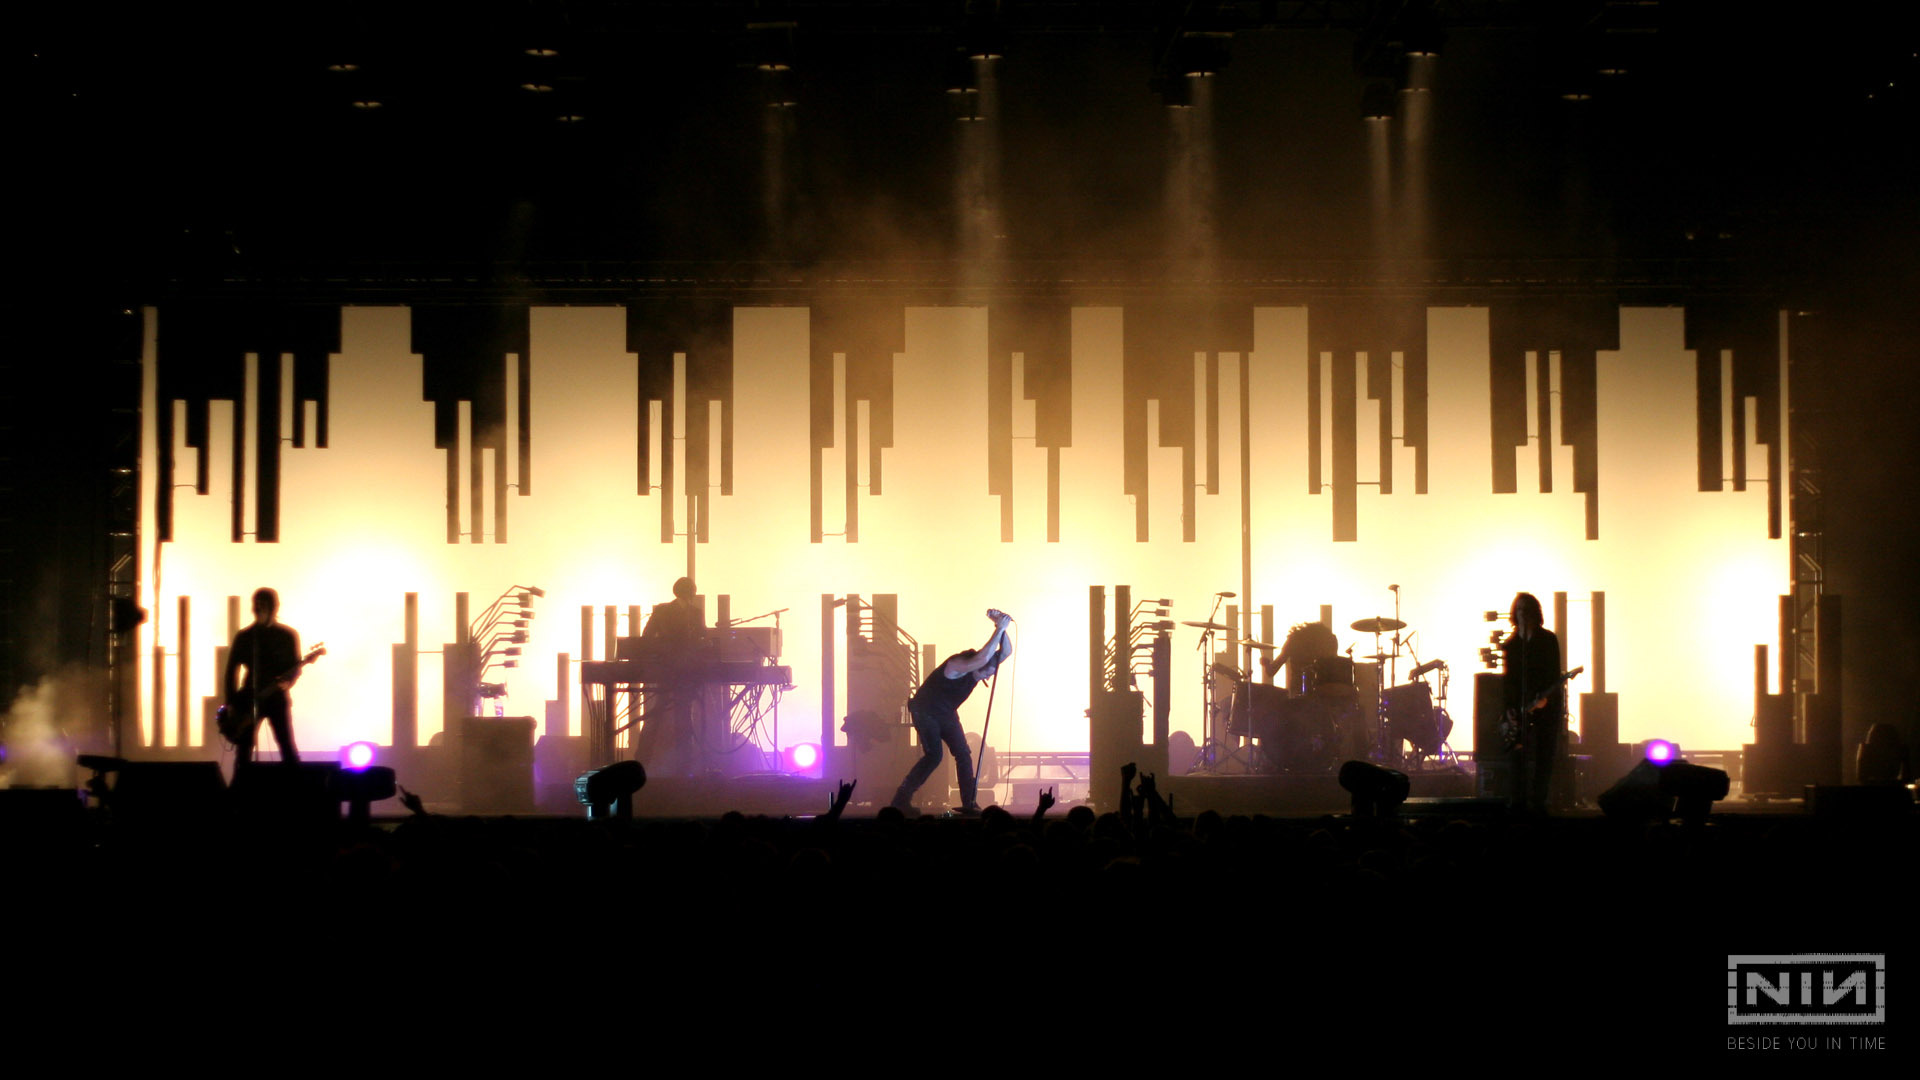 Nine Inch Nails on an Upward Spiral to Reunion in 2013 The Rock